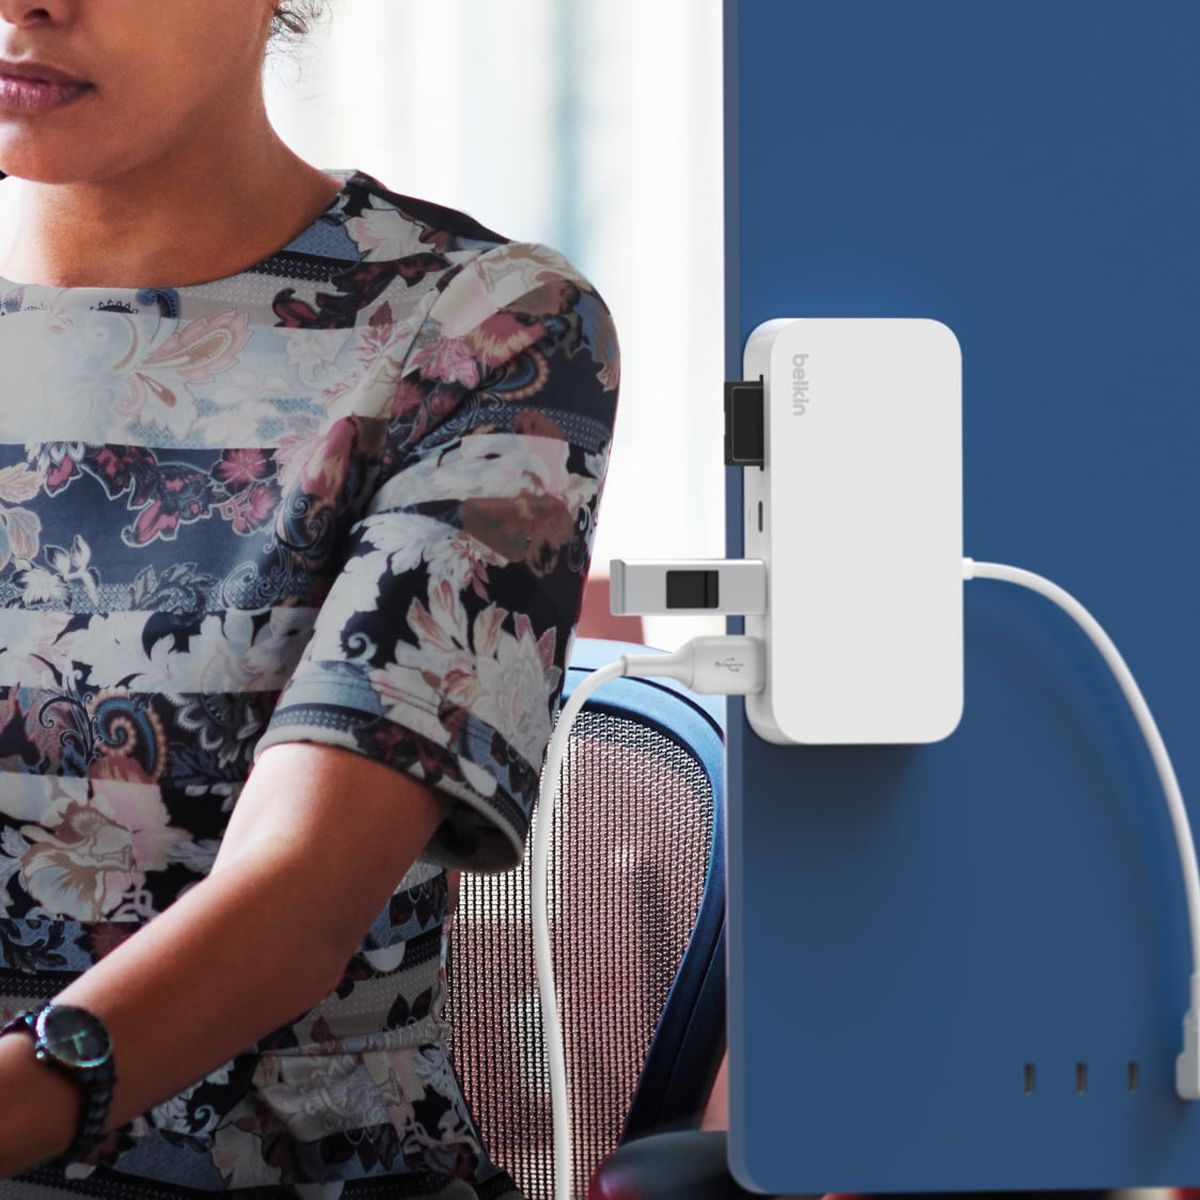 Belkin Debuts New Connect 4-Port USB-C Hub Made From Post-Consumer Recycled  Plastics - MacRumors